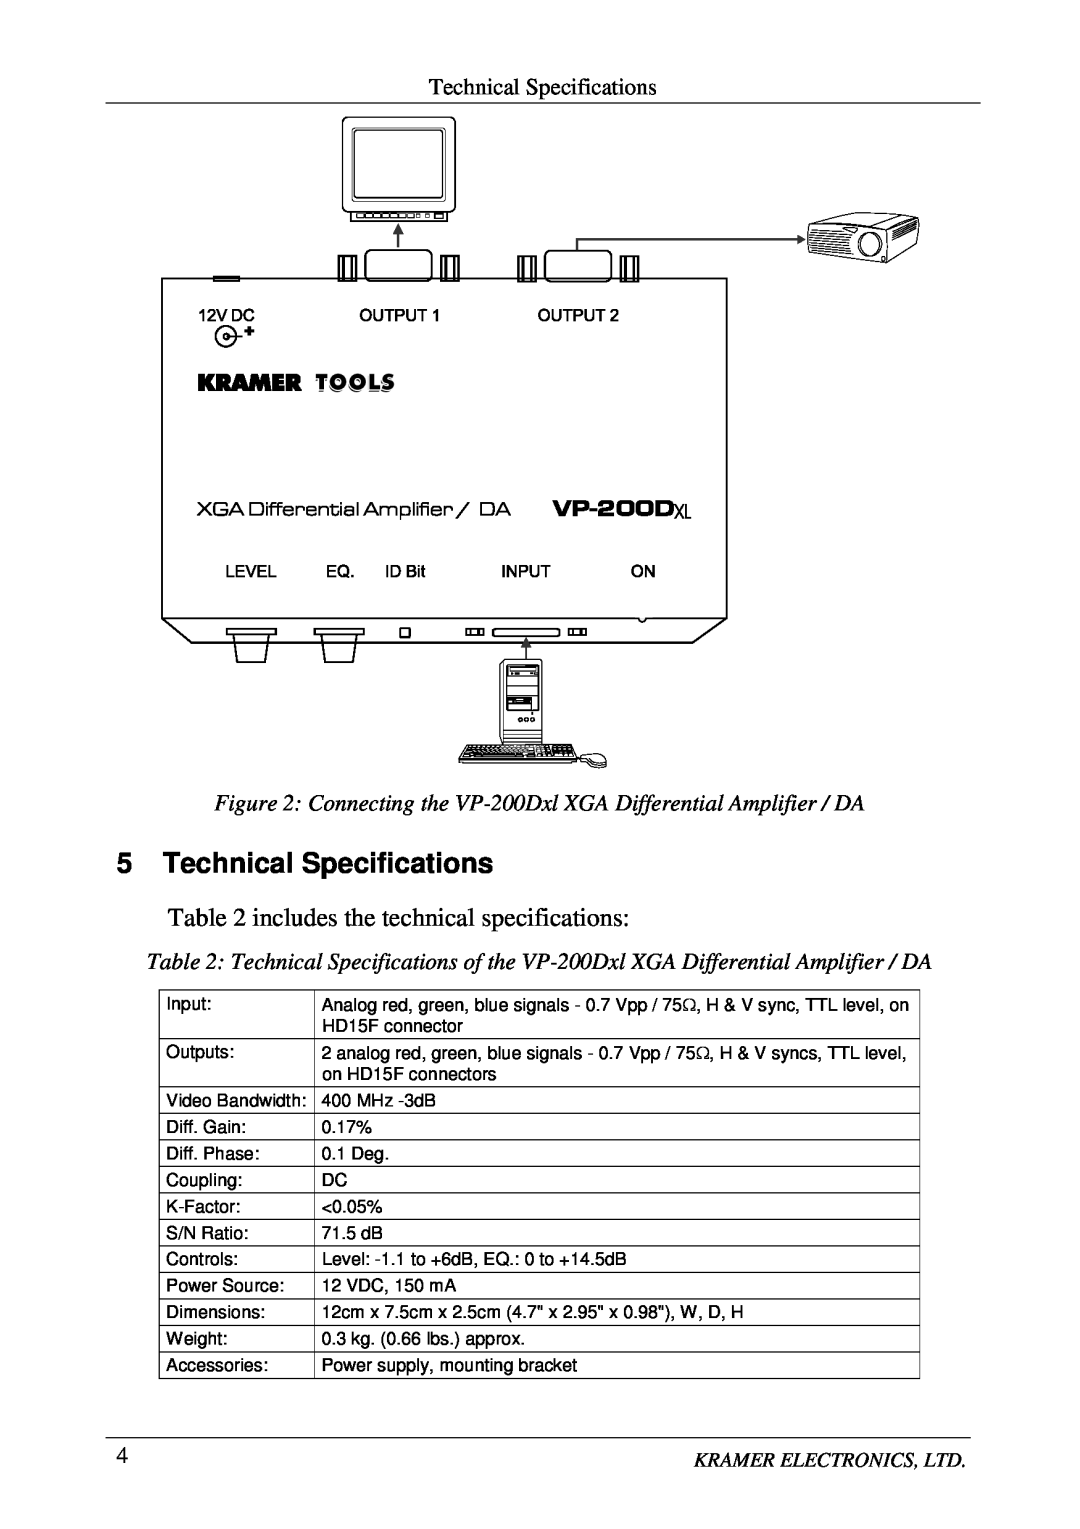 Kramer Electronics VP-200Dxl user manual includes the technical specifications, Technical Specifications 